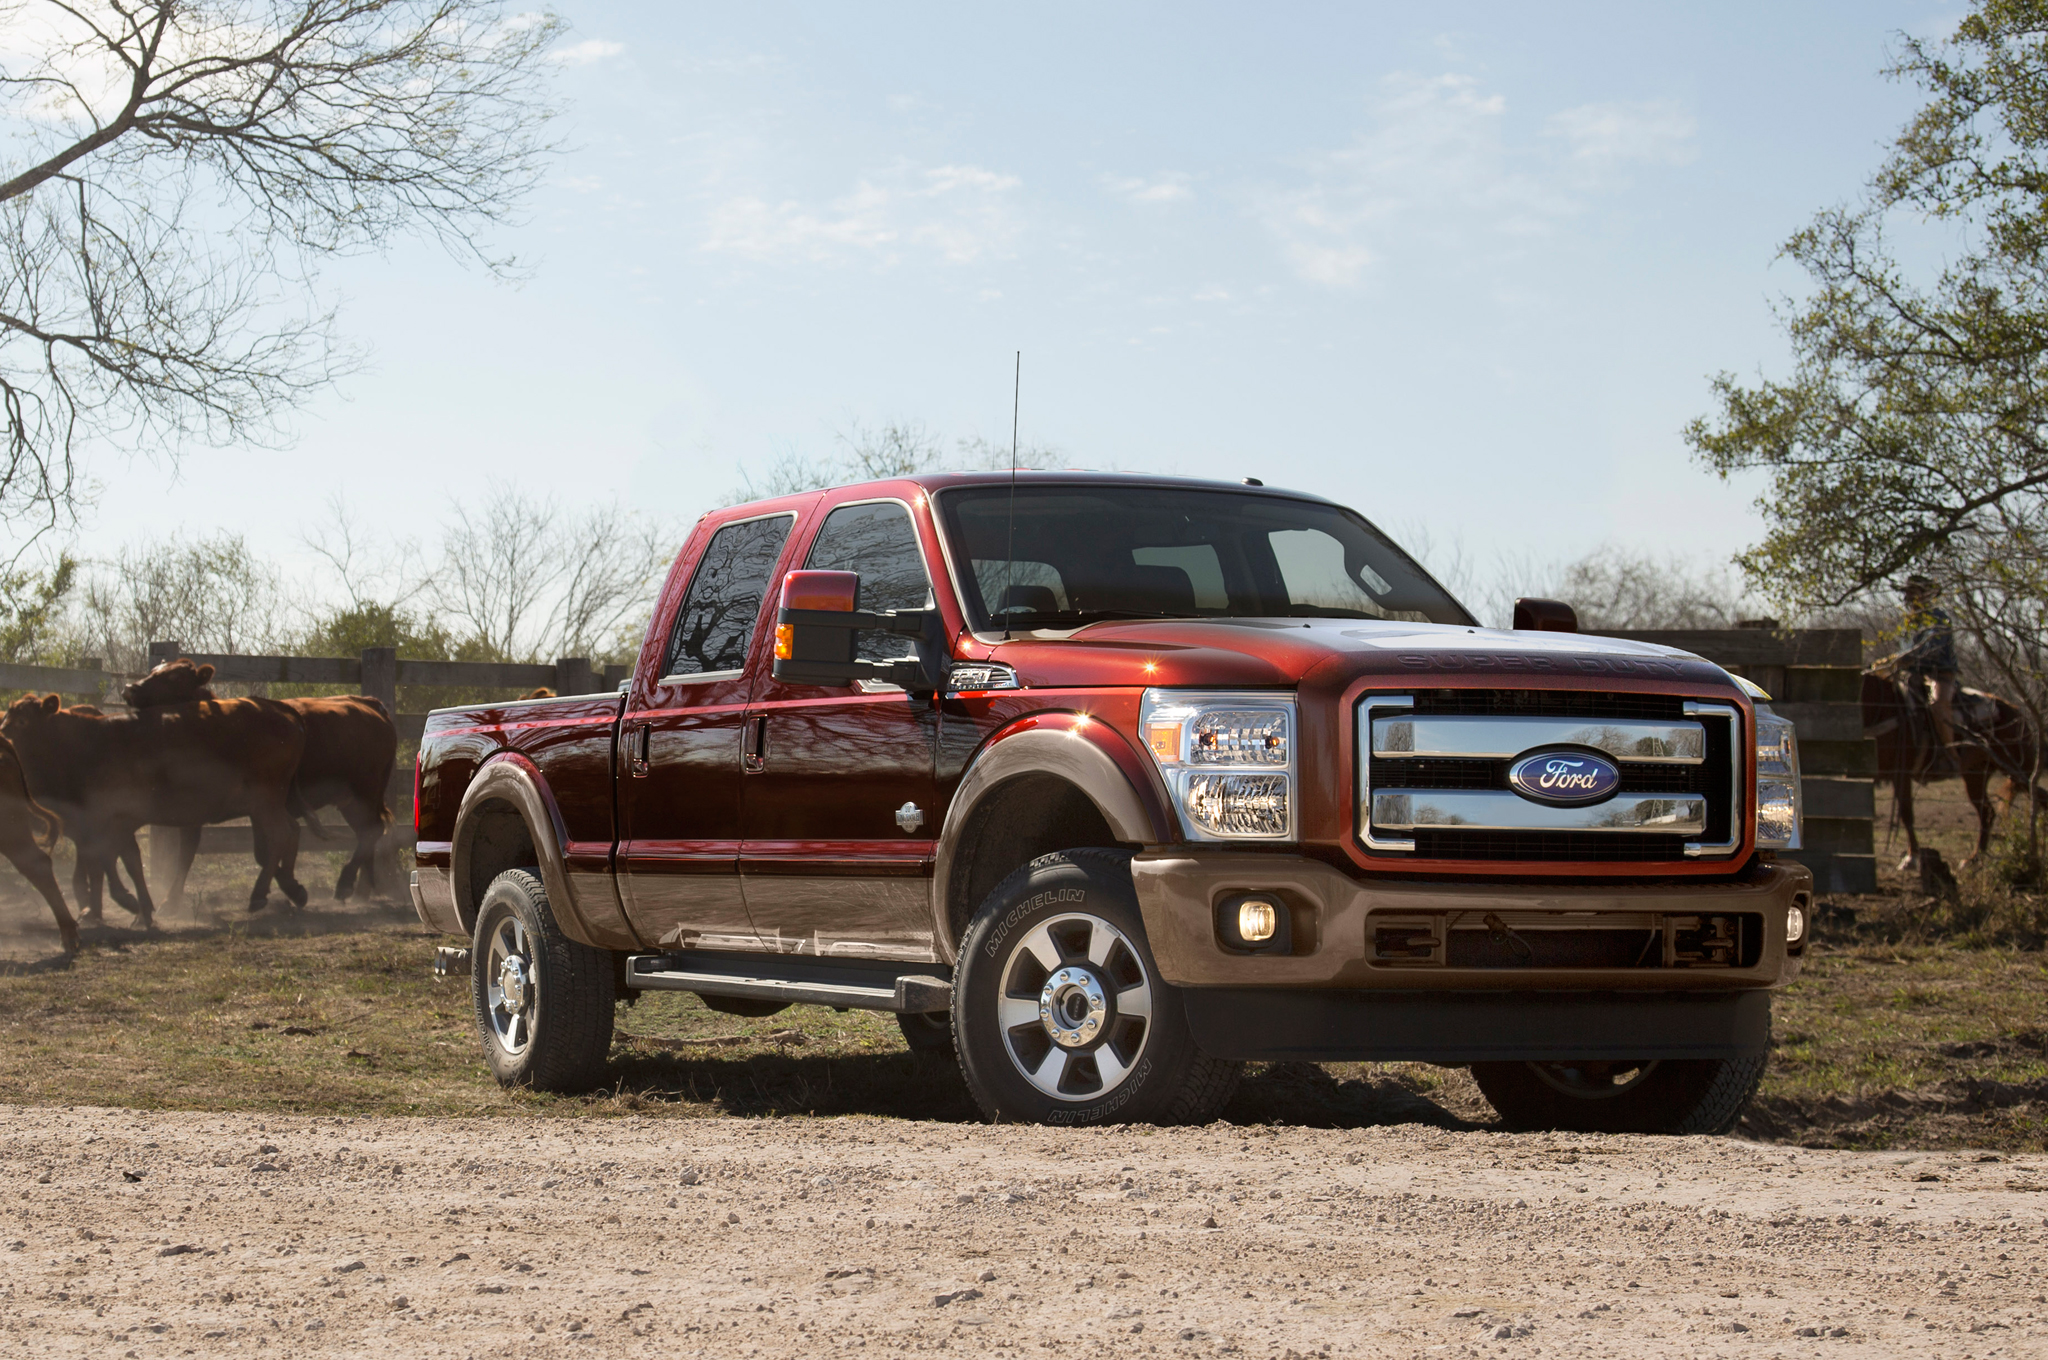 HQ Ford F-250 Super Duty King Ranch Wallpapers | File 2098.98Kb